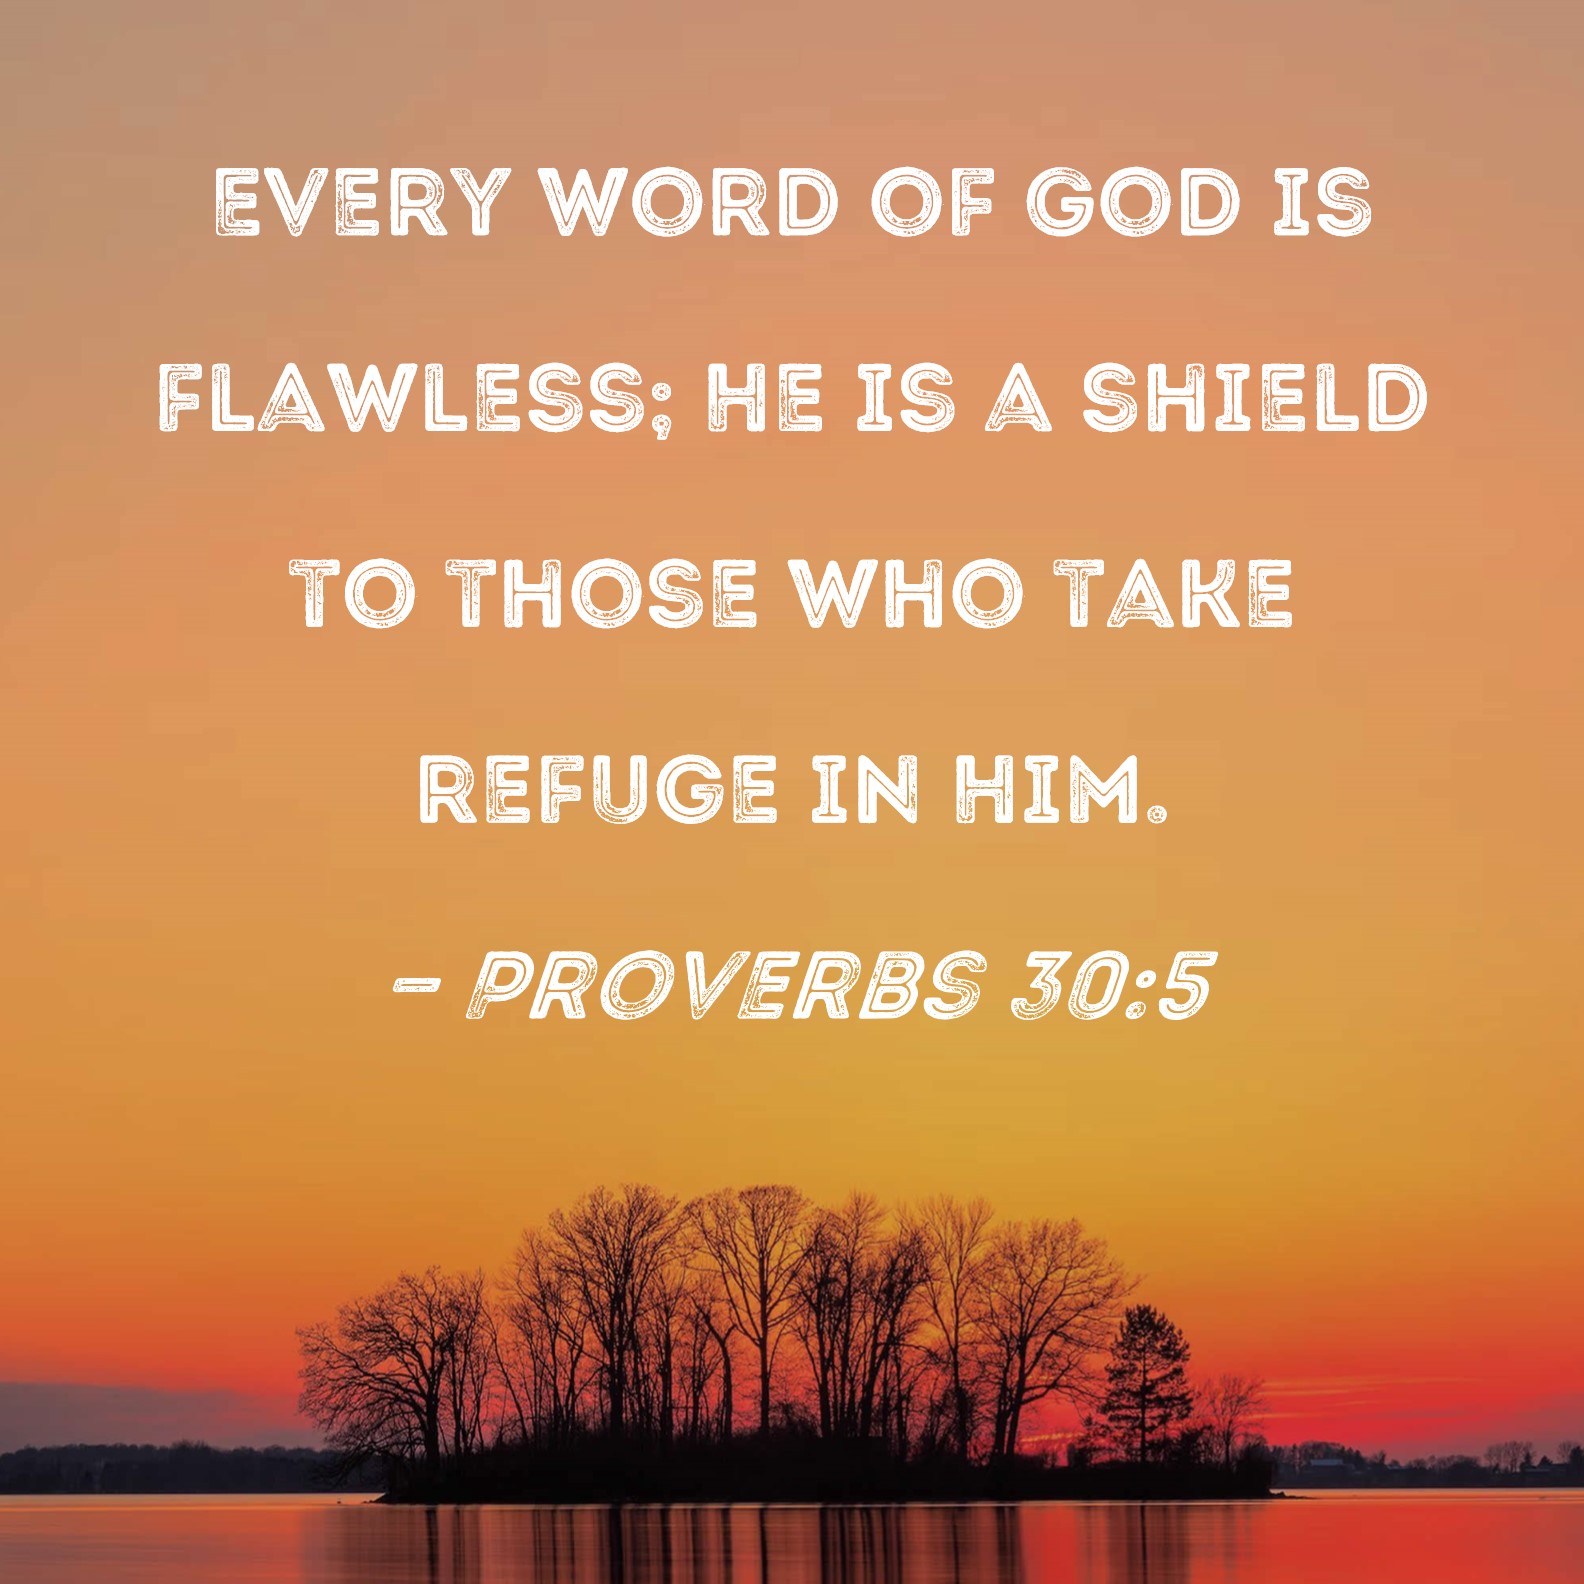 Proverbs 305 Every Word Of God Is Flawless He Is A Shield To Those